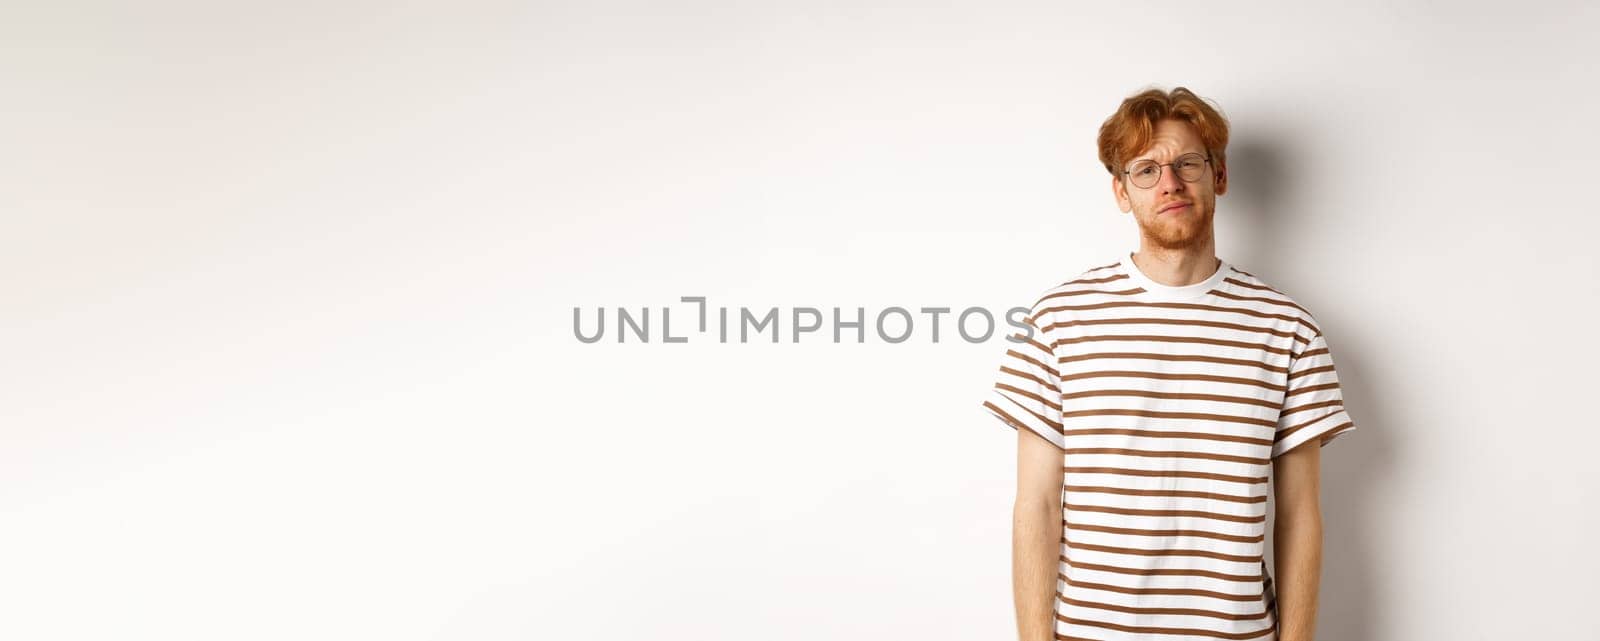 Reluctant and unamused redhead young man staring at camera, looking tired or displeased, standing over white background.